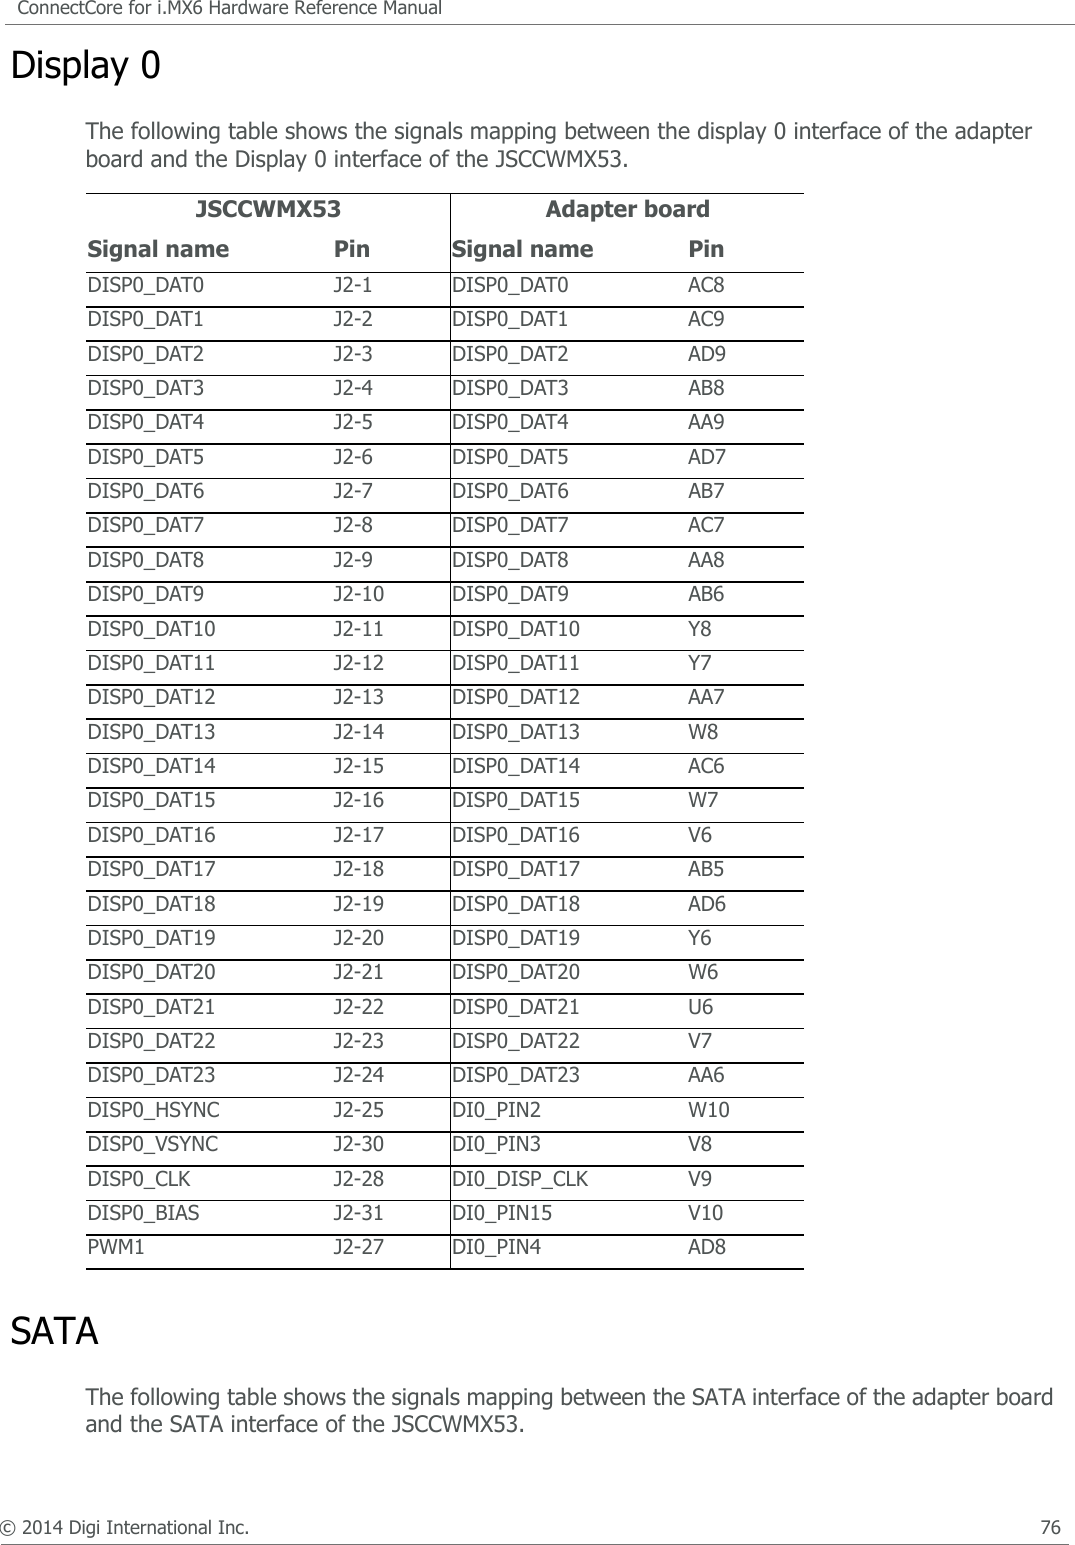 © 2014 Digi International Inc.      74ConnectCore for i.MX6 Hardware Reference ManualJTAGThe following table shows the signals mapping between the JTAG interface of the adapter board and the JTAG interface of the JSCCWMX53.LVDS0_TXD1_P J1-73 LVDS0_TXD1_P E4LVDS0_TXD2_N J1-75 LVDS0_TXD2_N C4LVDS0_TXD2_P J1-77 LVDS0_TXD2_P B4LVDS0_TXD3_N J1-79 LVDS0_TXD3_N R4LVDS0_TXD3_P J1-81 LVDS0_TXD3_P P4JSCCWMX53 Adapter boardSignal name Pin Signal name PinJTAG_TCK J1-91 JTAG_TCK F13JTAG_TRST_N J1-92 JTAG_TRST_N D15JTAG_TMS J1-93 JTAG_TMS F14JTAG_MOD J1-94 JTAG_MOD G13JTAG_TDI J1-95 JTAG_TDI D15JTAG_TDO J1-97 JTAG_TDO E14